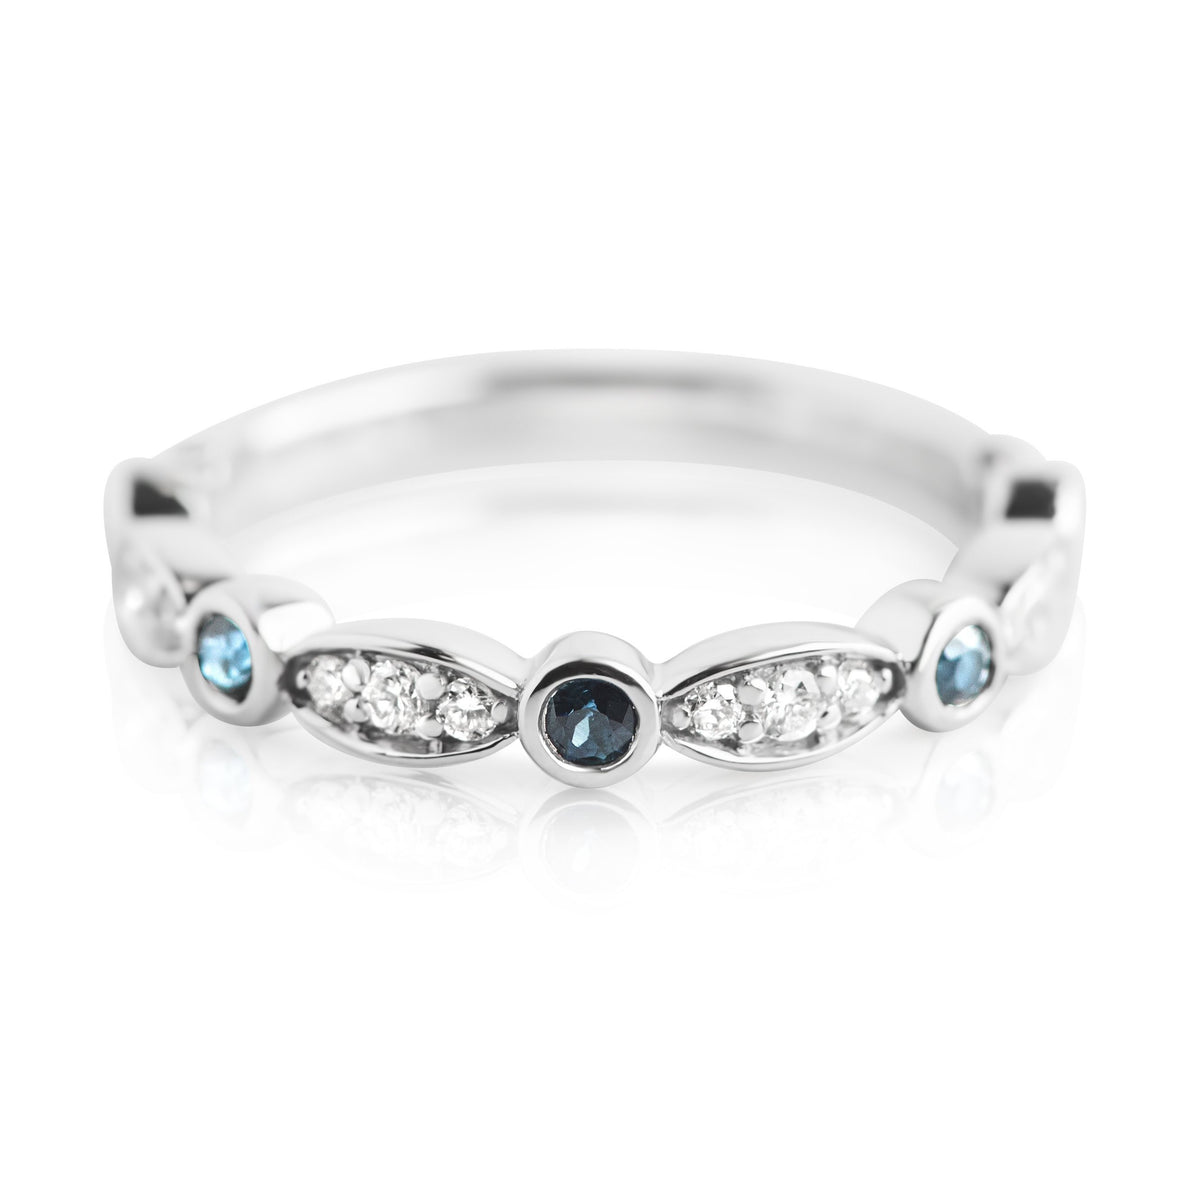 DIAMOND AND SAPPHIRE WEDDING RING WITH WHITE GOLD BAND 